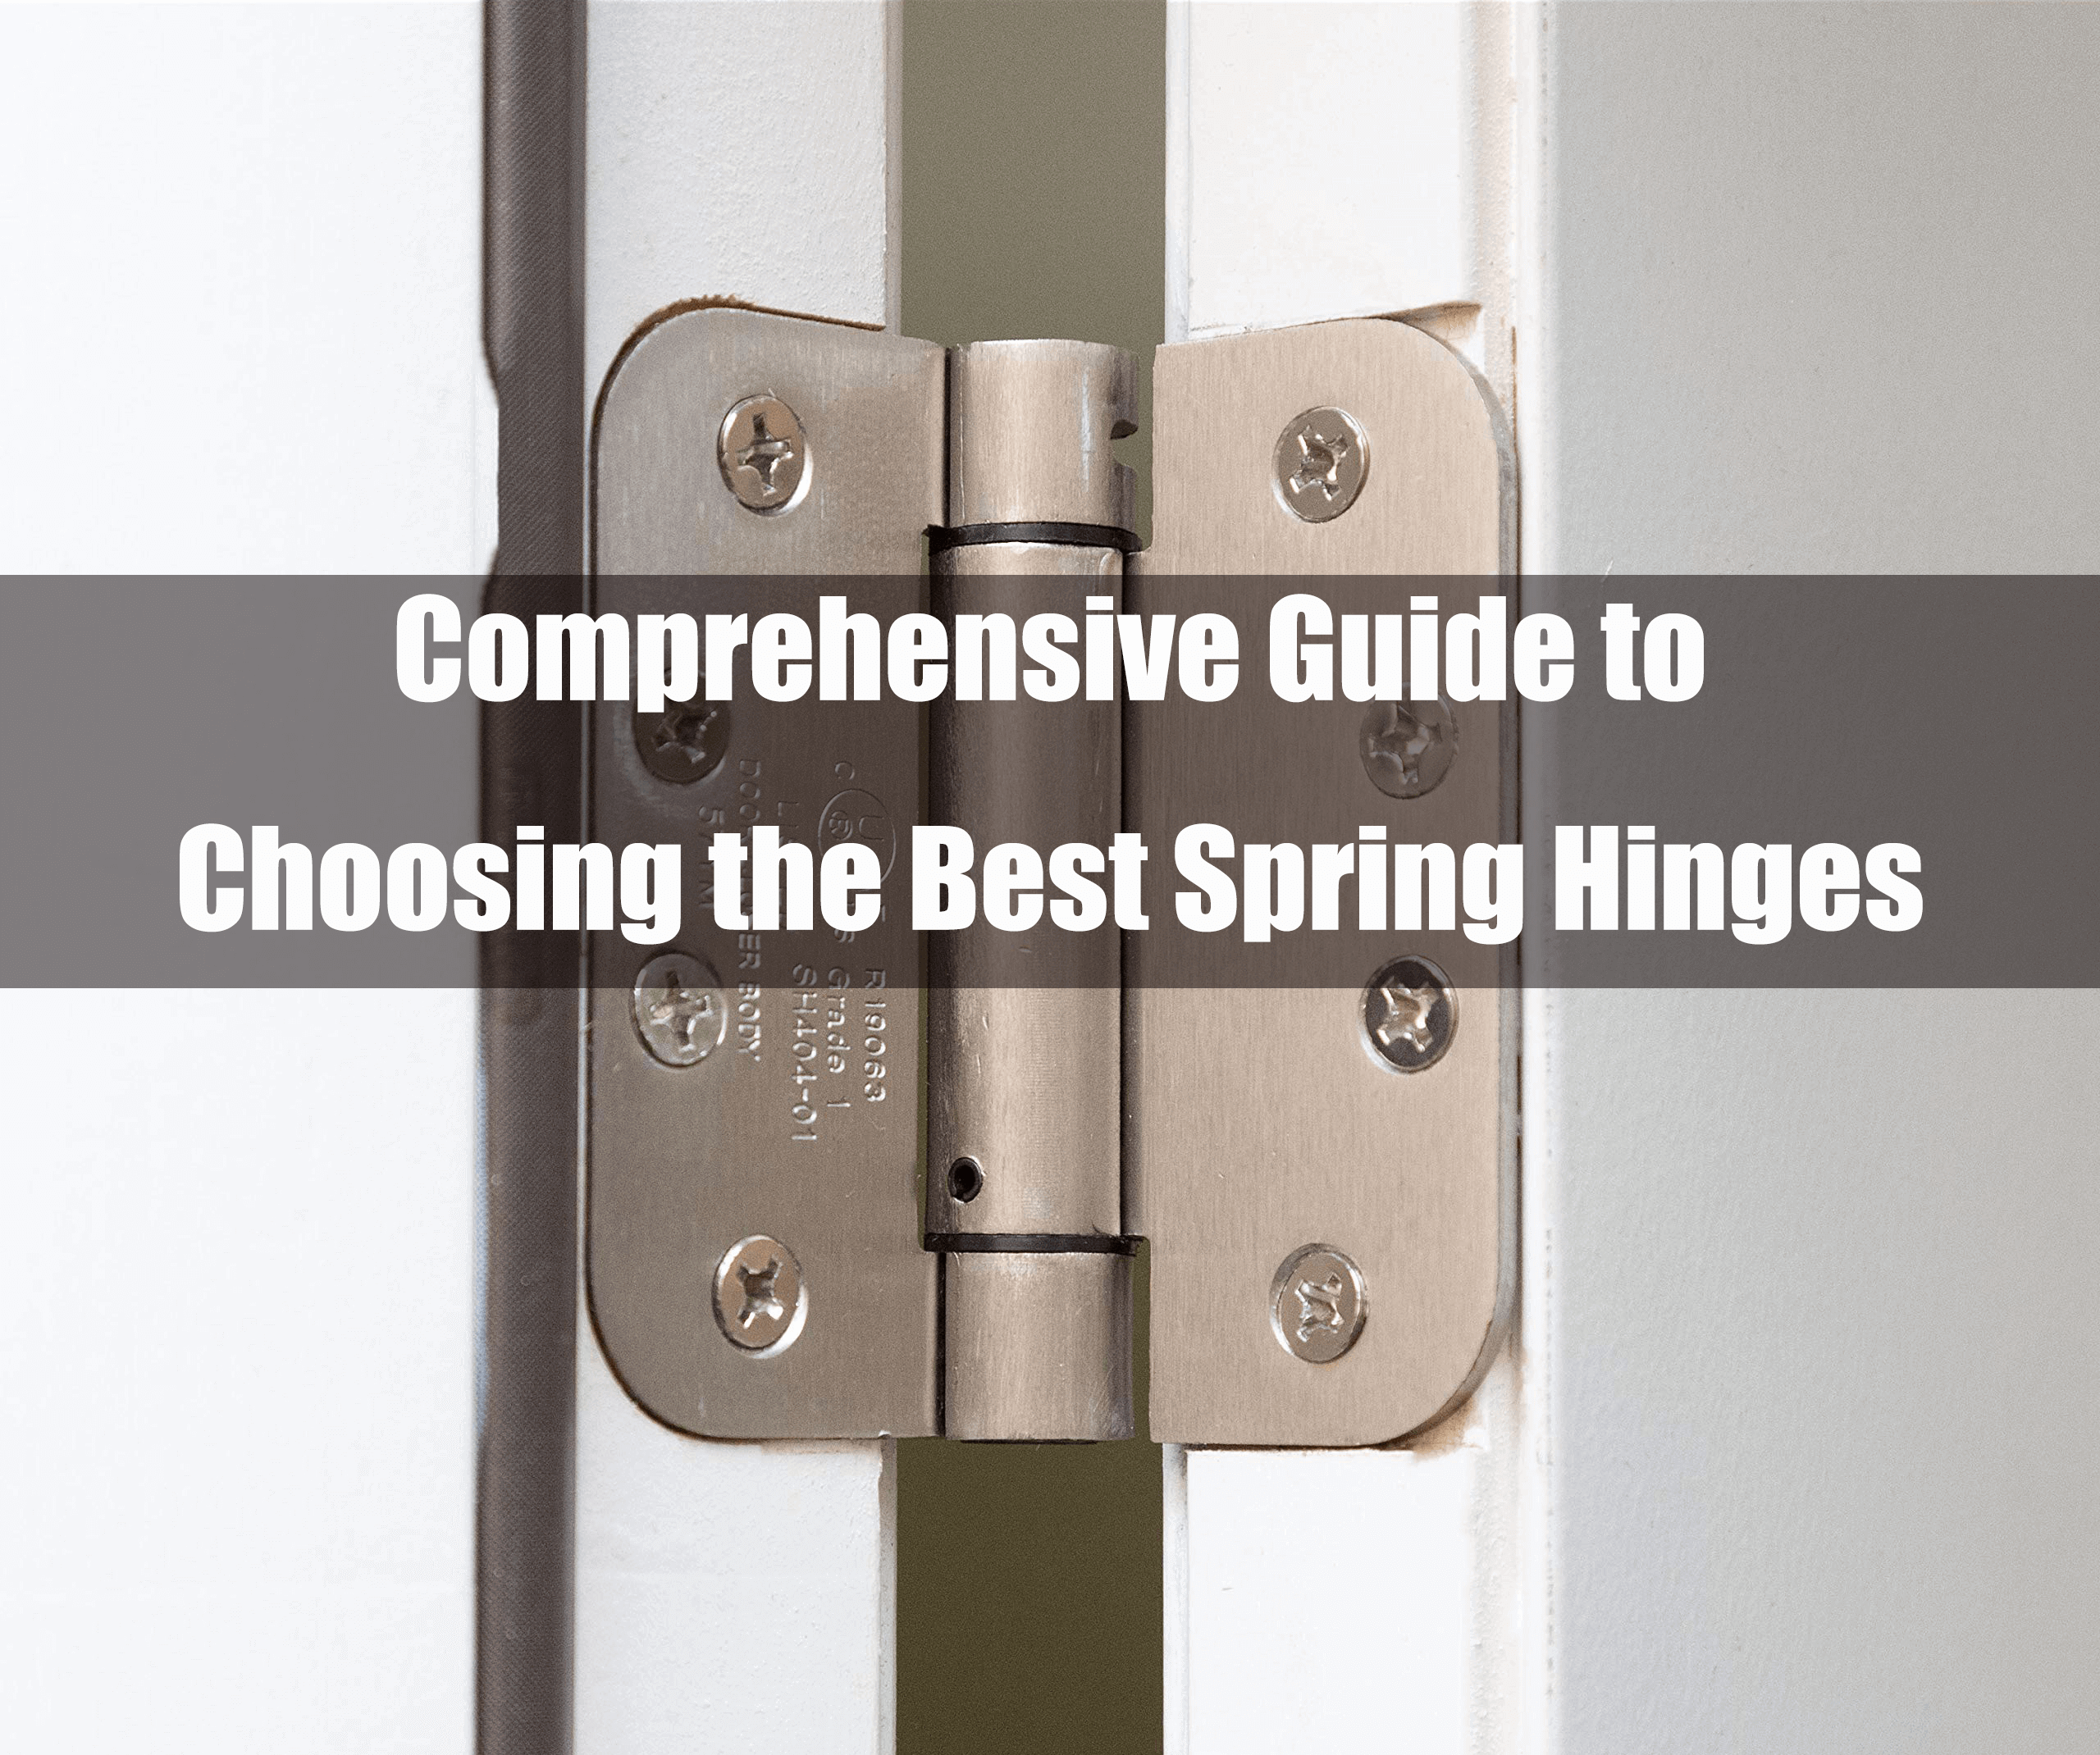 Comprehensive Guide to Choosing the Best Spring Hinges